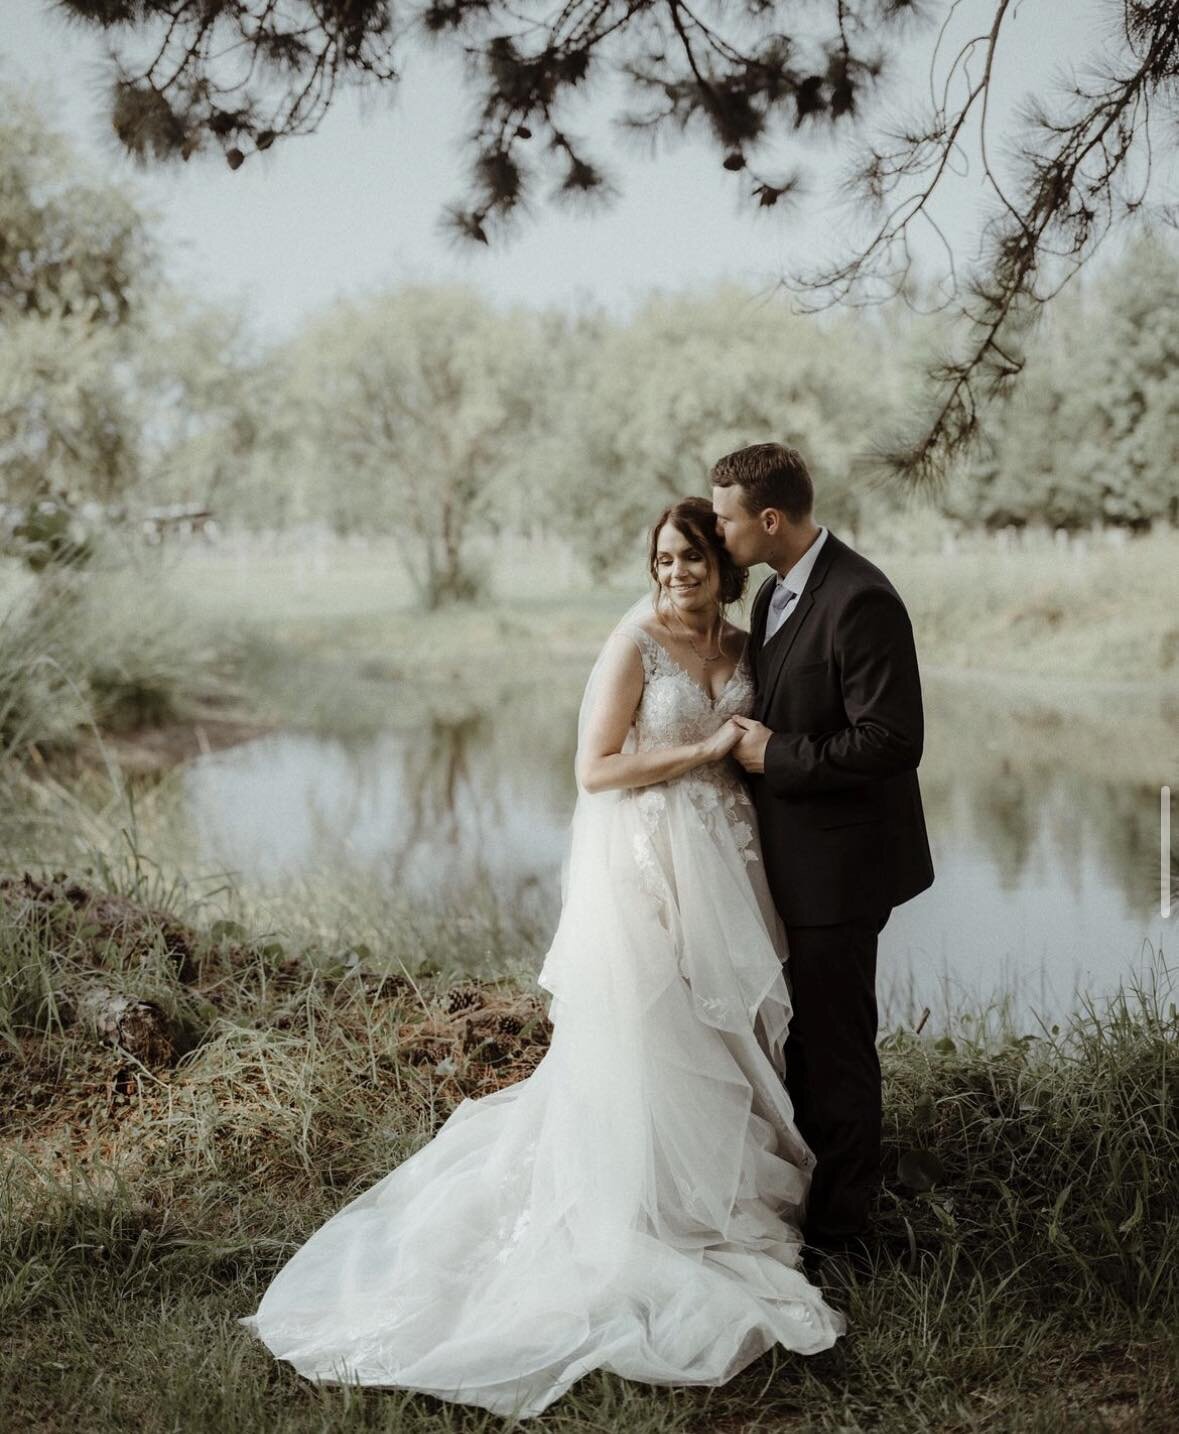 Kim &amp; Jayden 🖤📸

We live a whimsical romantic moment &amp; these two absolutely nailed the brief 💍

The love here is real &amp; raw, outshining the charming countryside backdrop. Captured by the Lover&rsquo;s Lake 🌿

To enquire about how you 